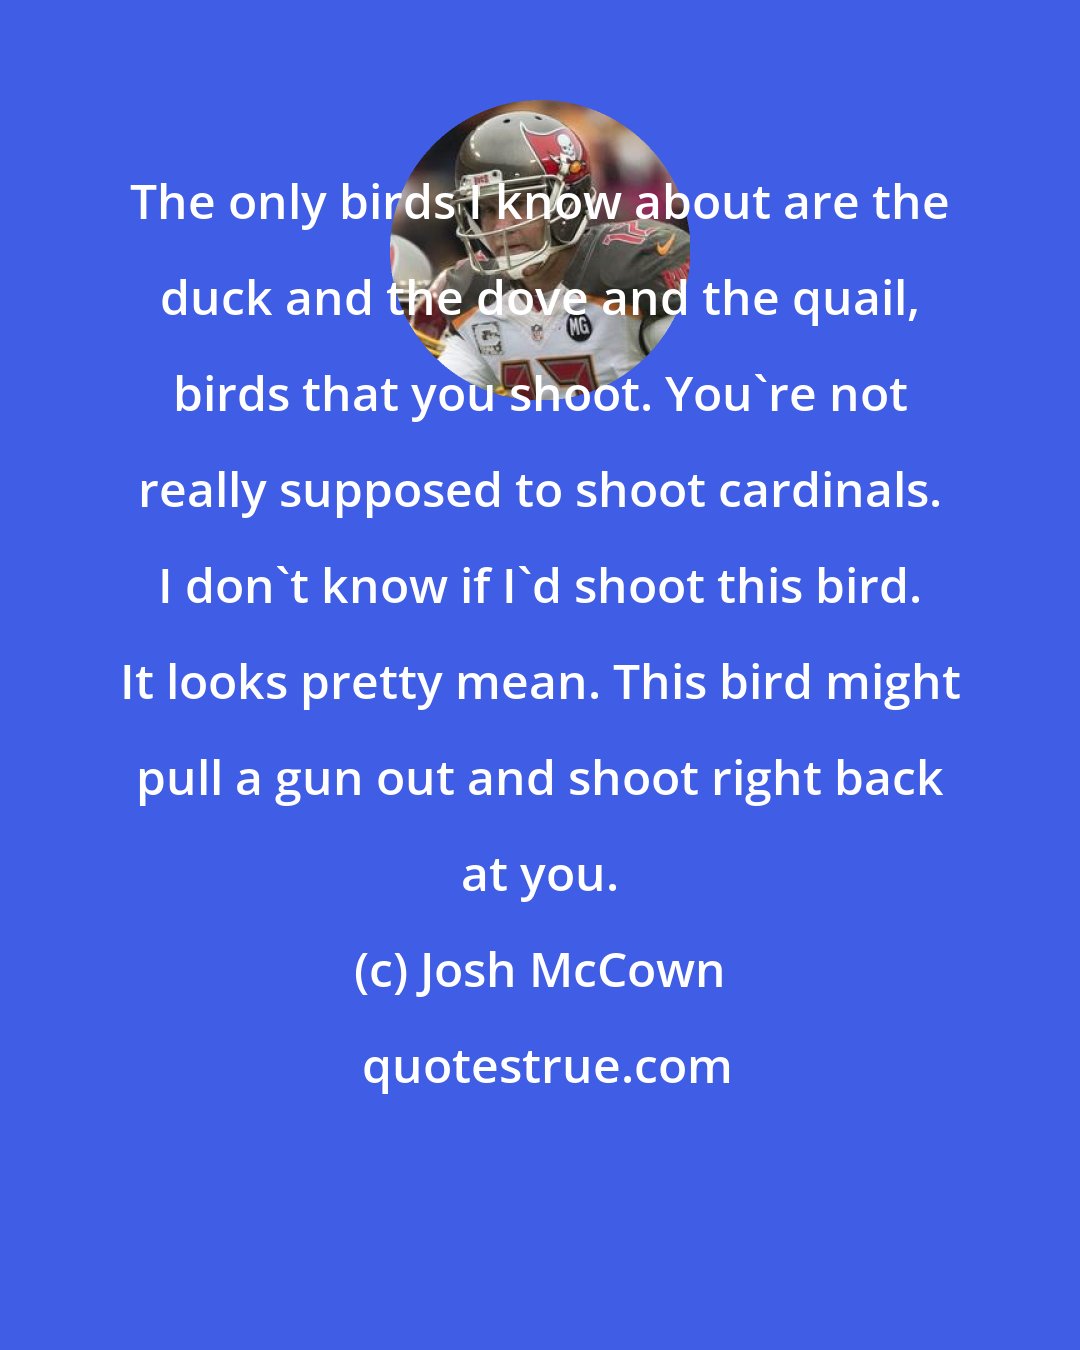 Josh McCown: The only birds I know about are the duck and the dove and the quail, birds that you shoot. You're not really supposed to shoot cardinals. I don't know if I'd shoot this bird. It looks pretty mean. This bird might pull a gun out and shoot right back at you.